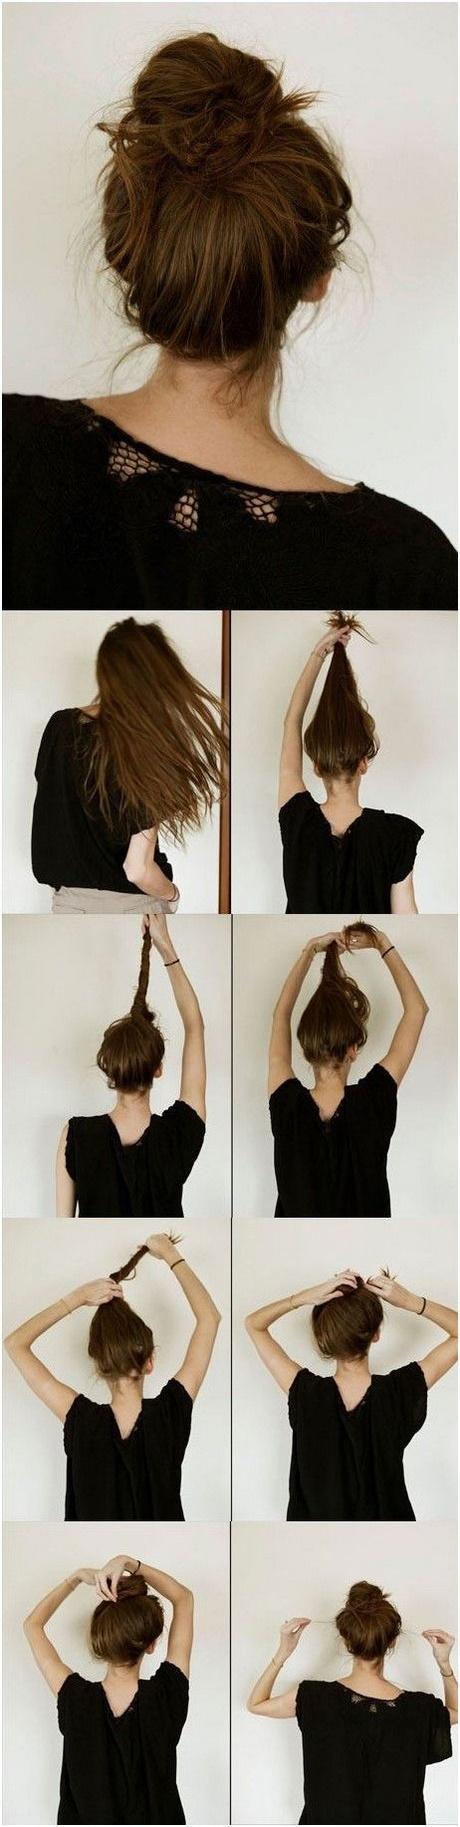 Everyday hairstyles for girls everyday-hairstyles-for-girls-68_14